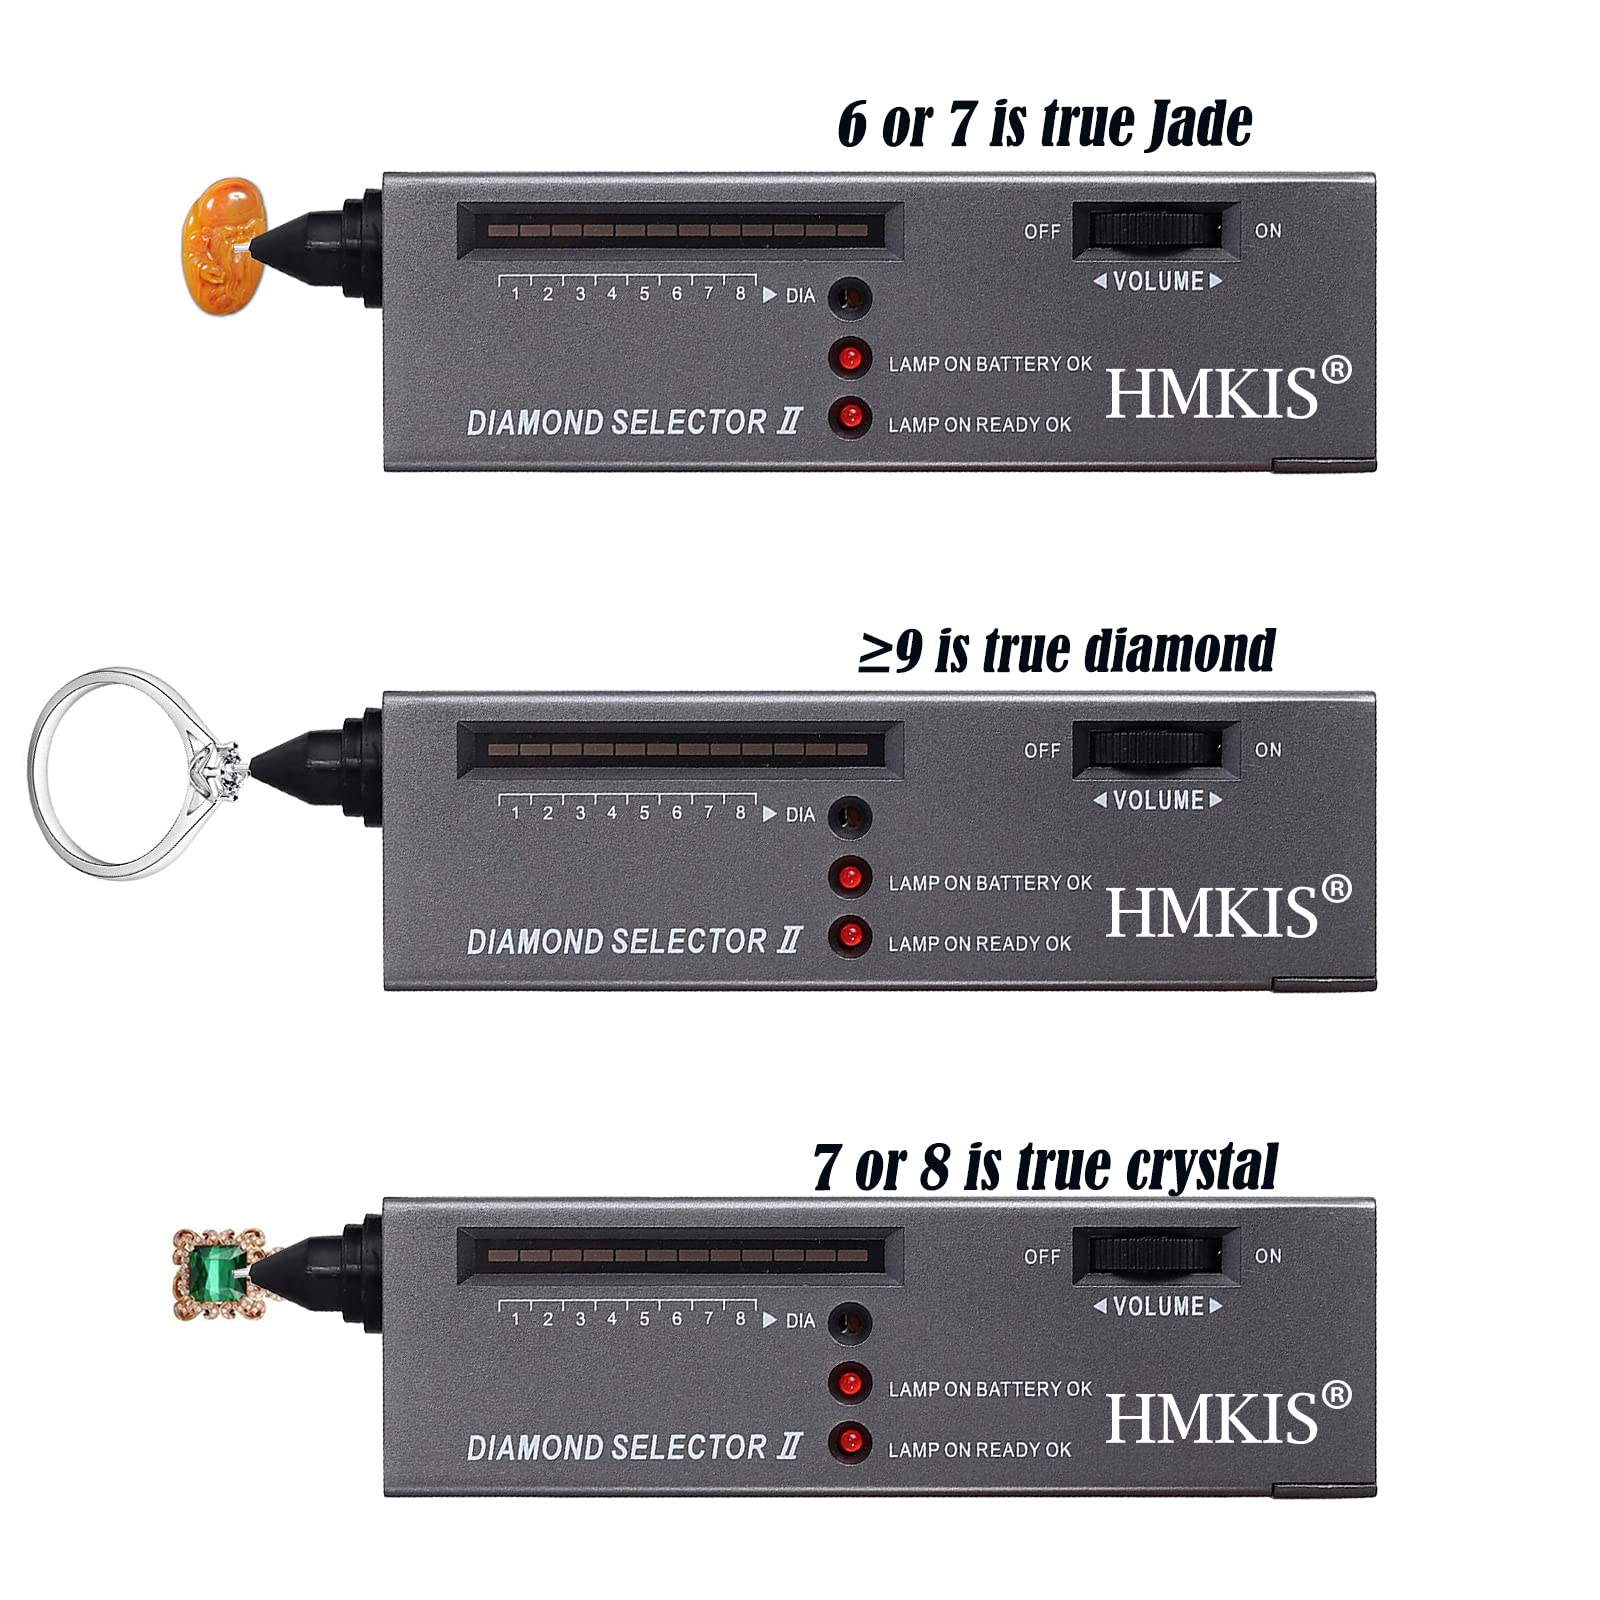 HMKIS Diamond Tester, Jewelry Diamond Tester, Thermal Conductivity Meter, Can't Test Metal,Must be Operated with Both Hands